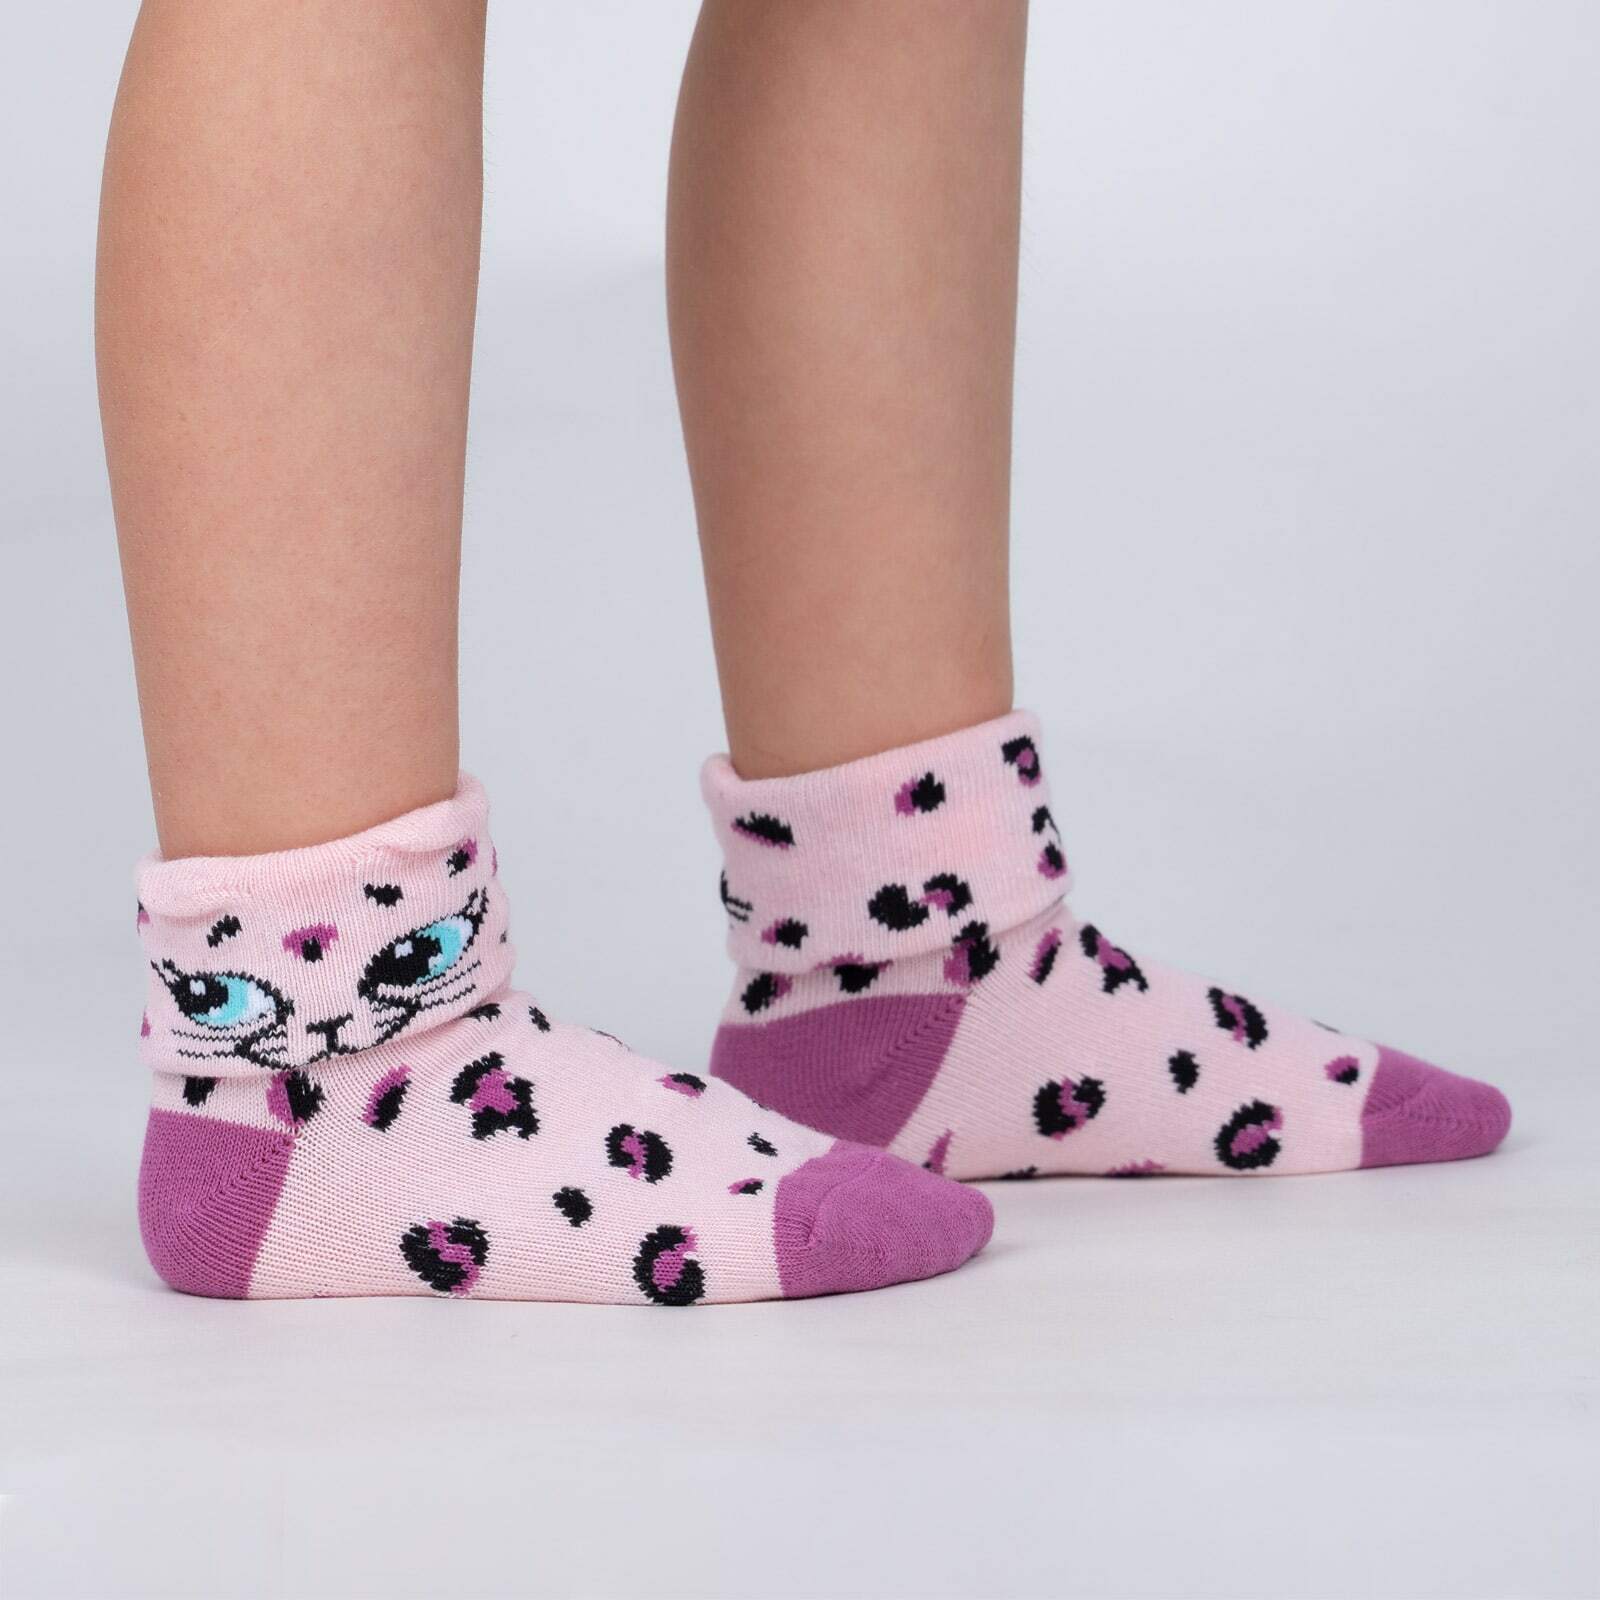 OOS-Toddler's Turn Cuff Check Meowt Ankle